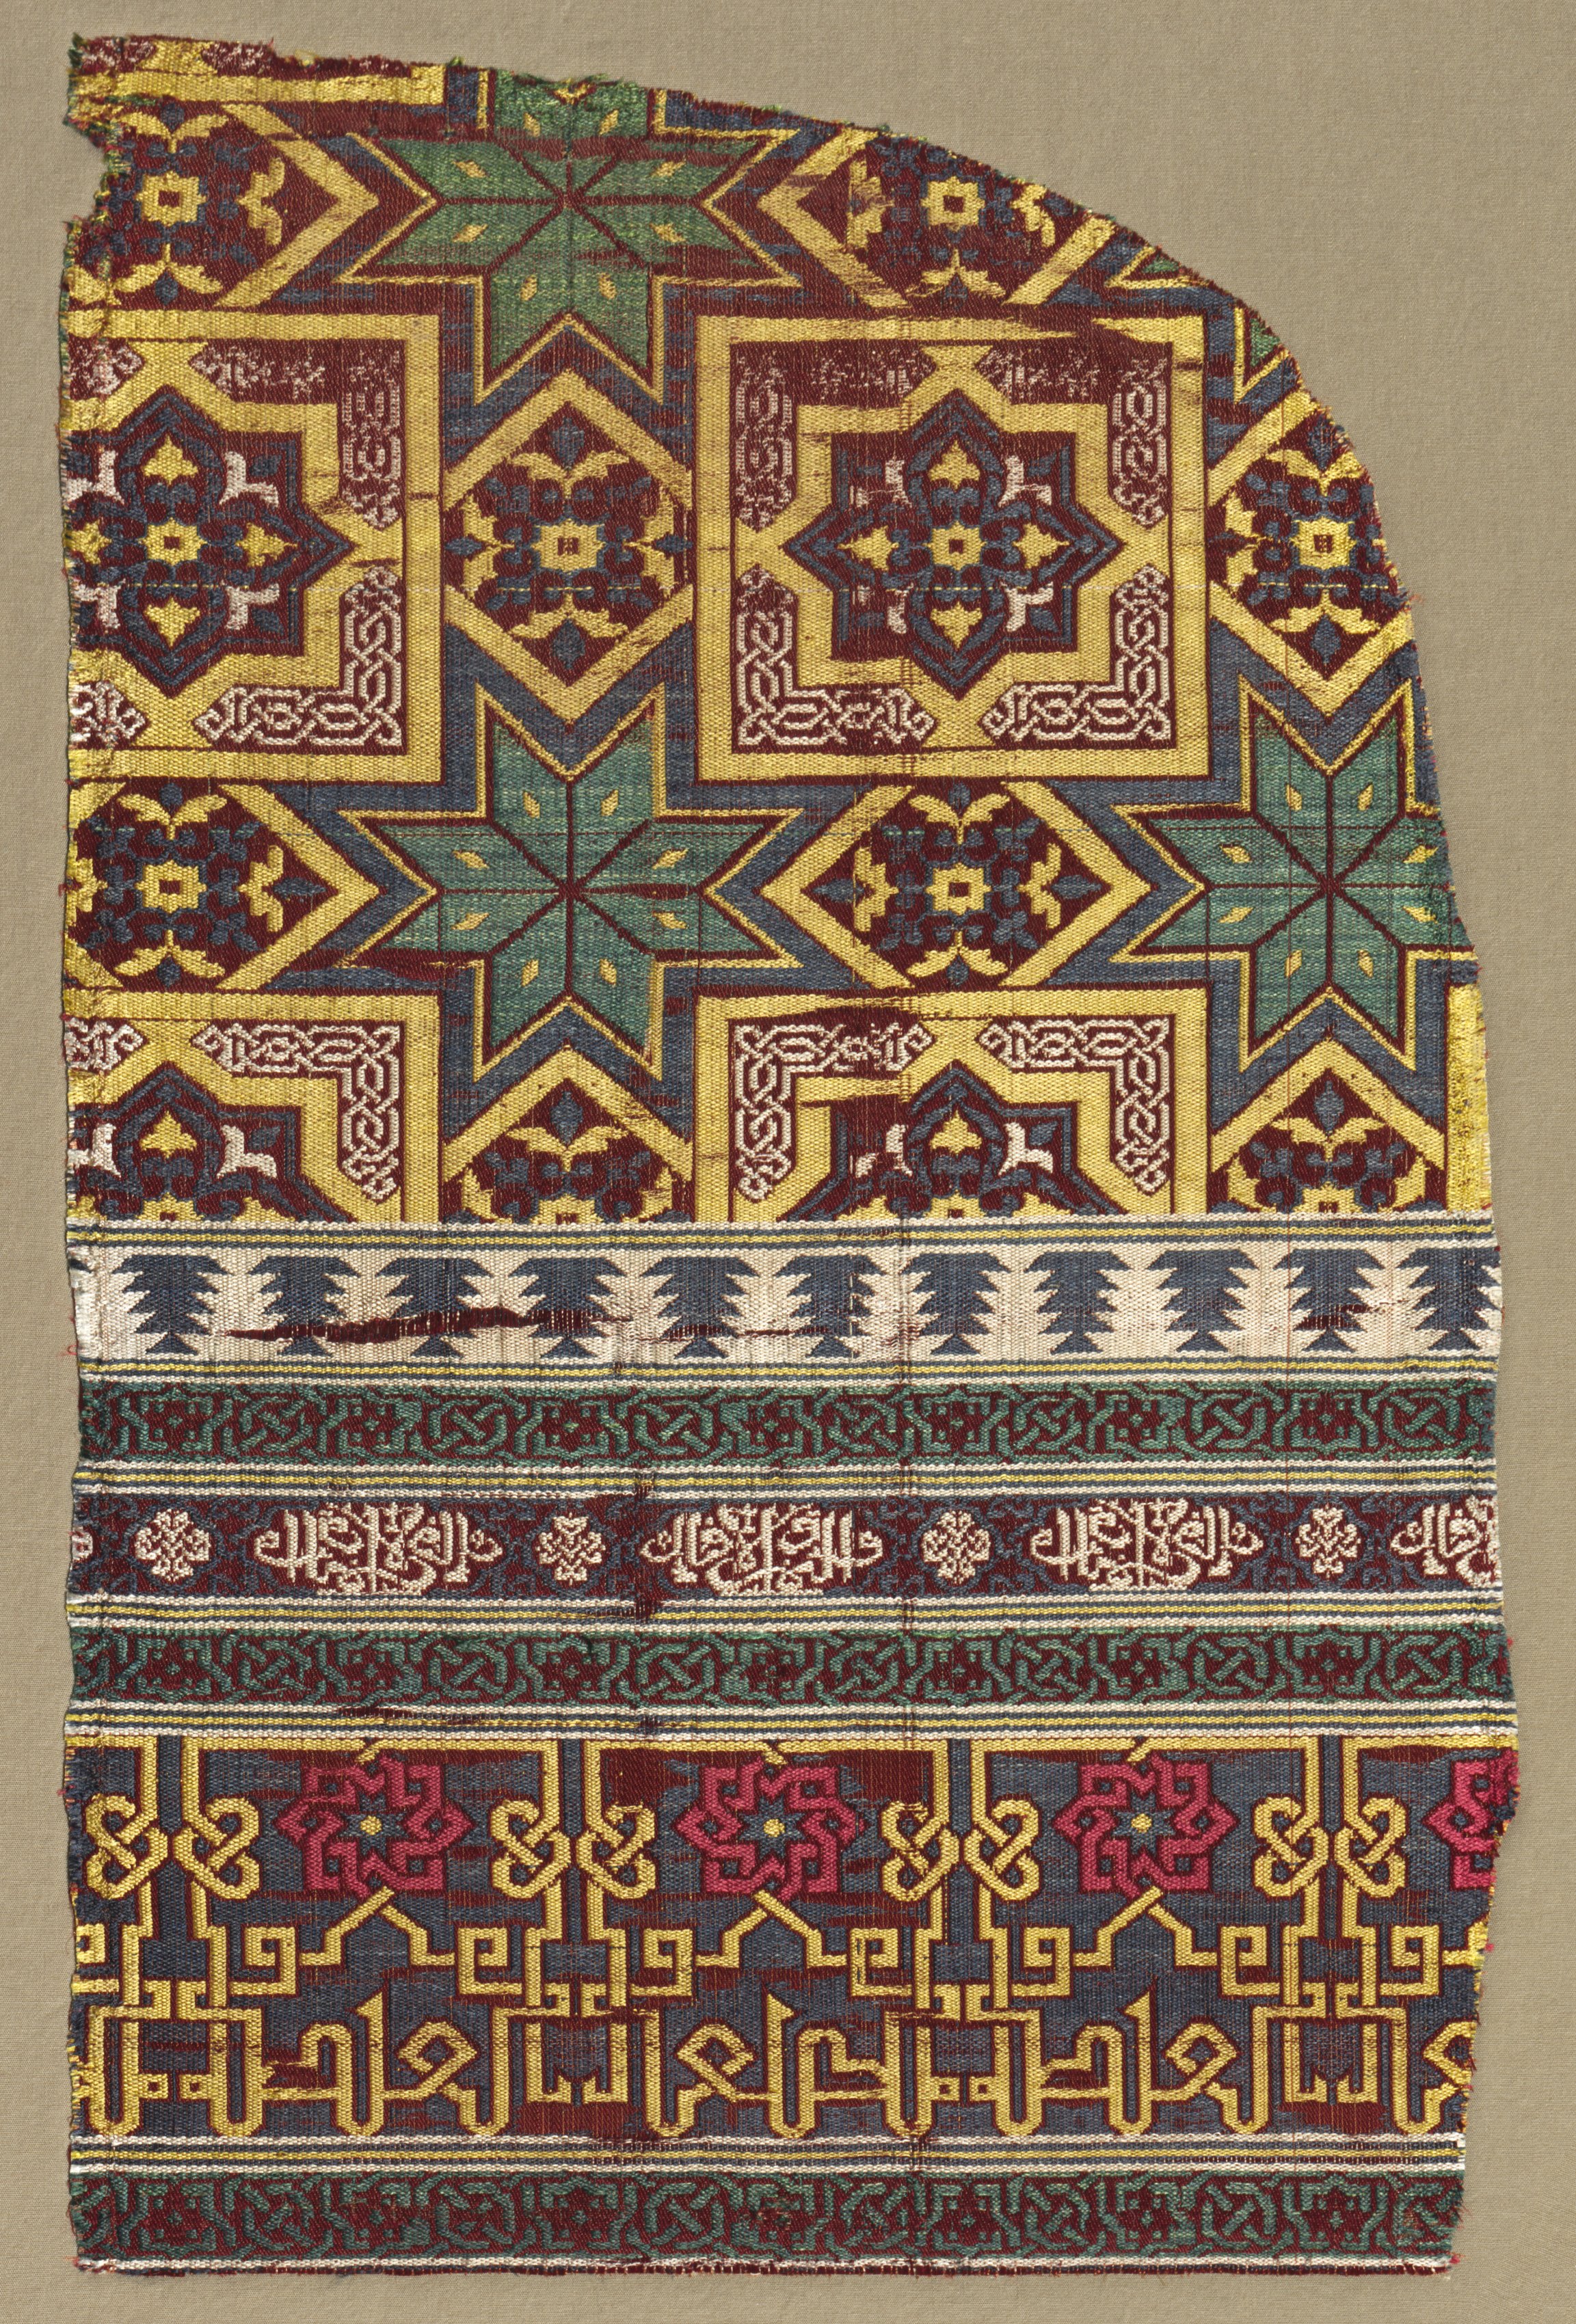 Alhambra hanging fragment with decorated bands